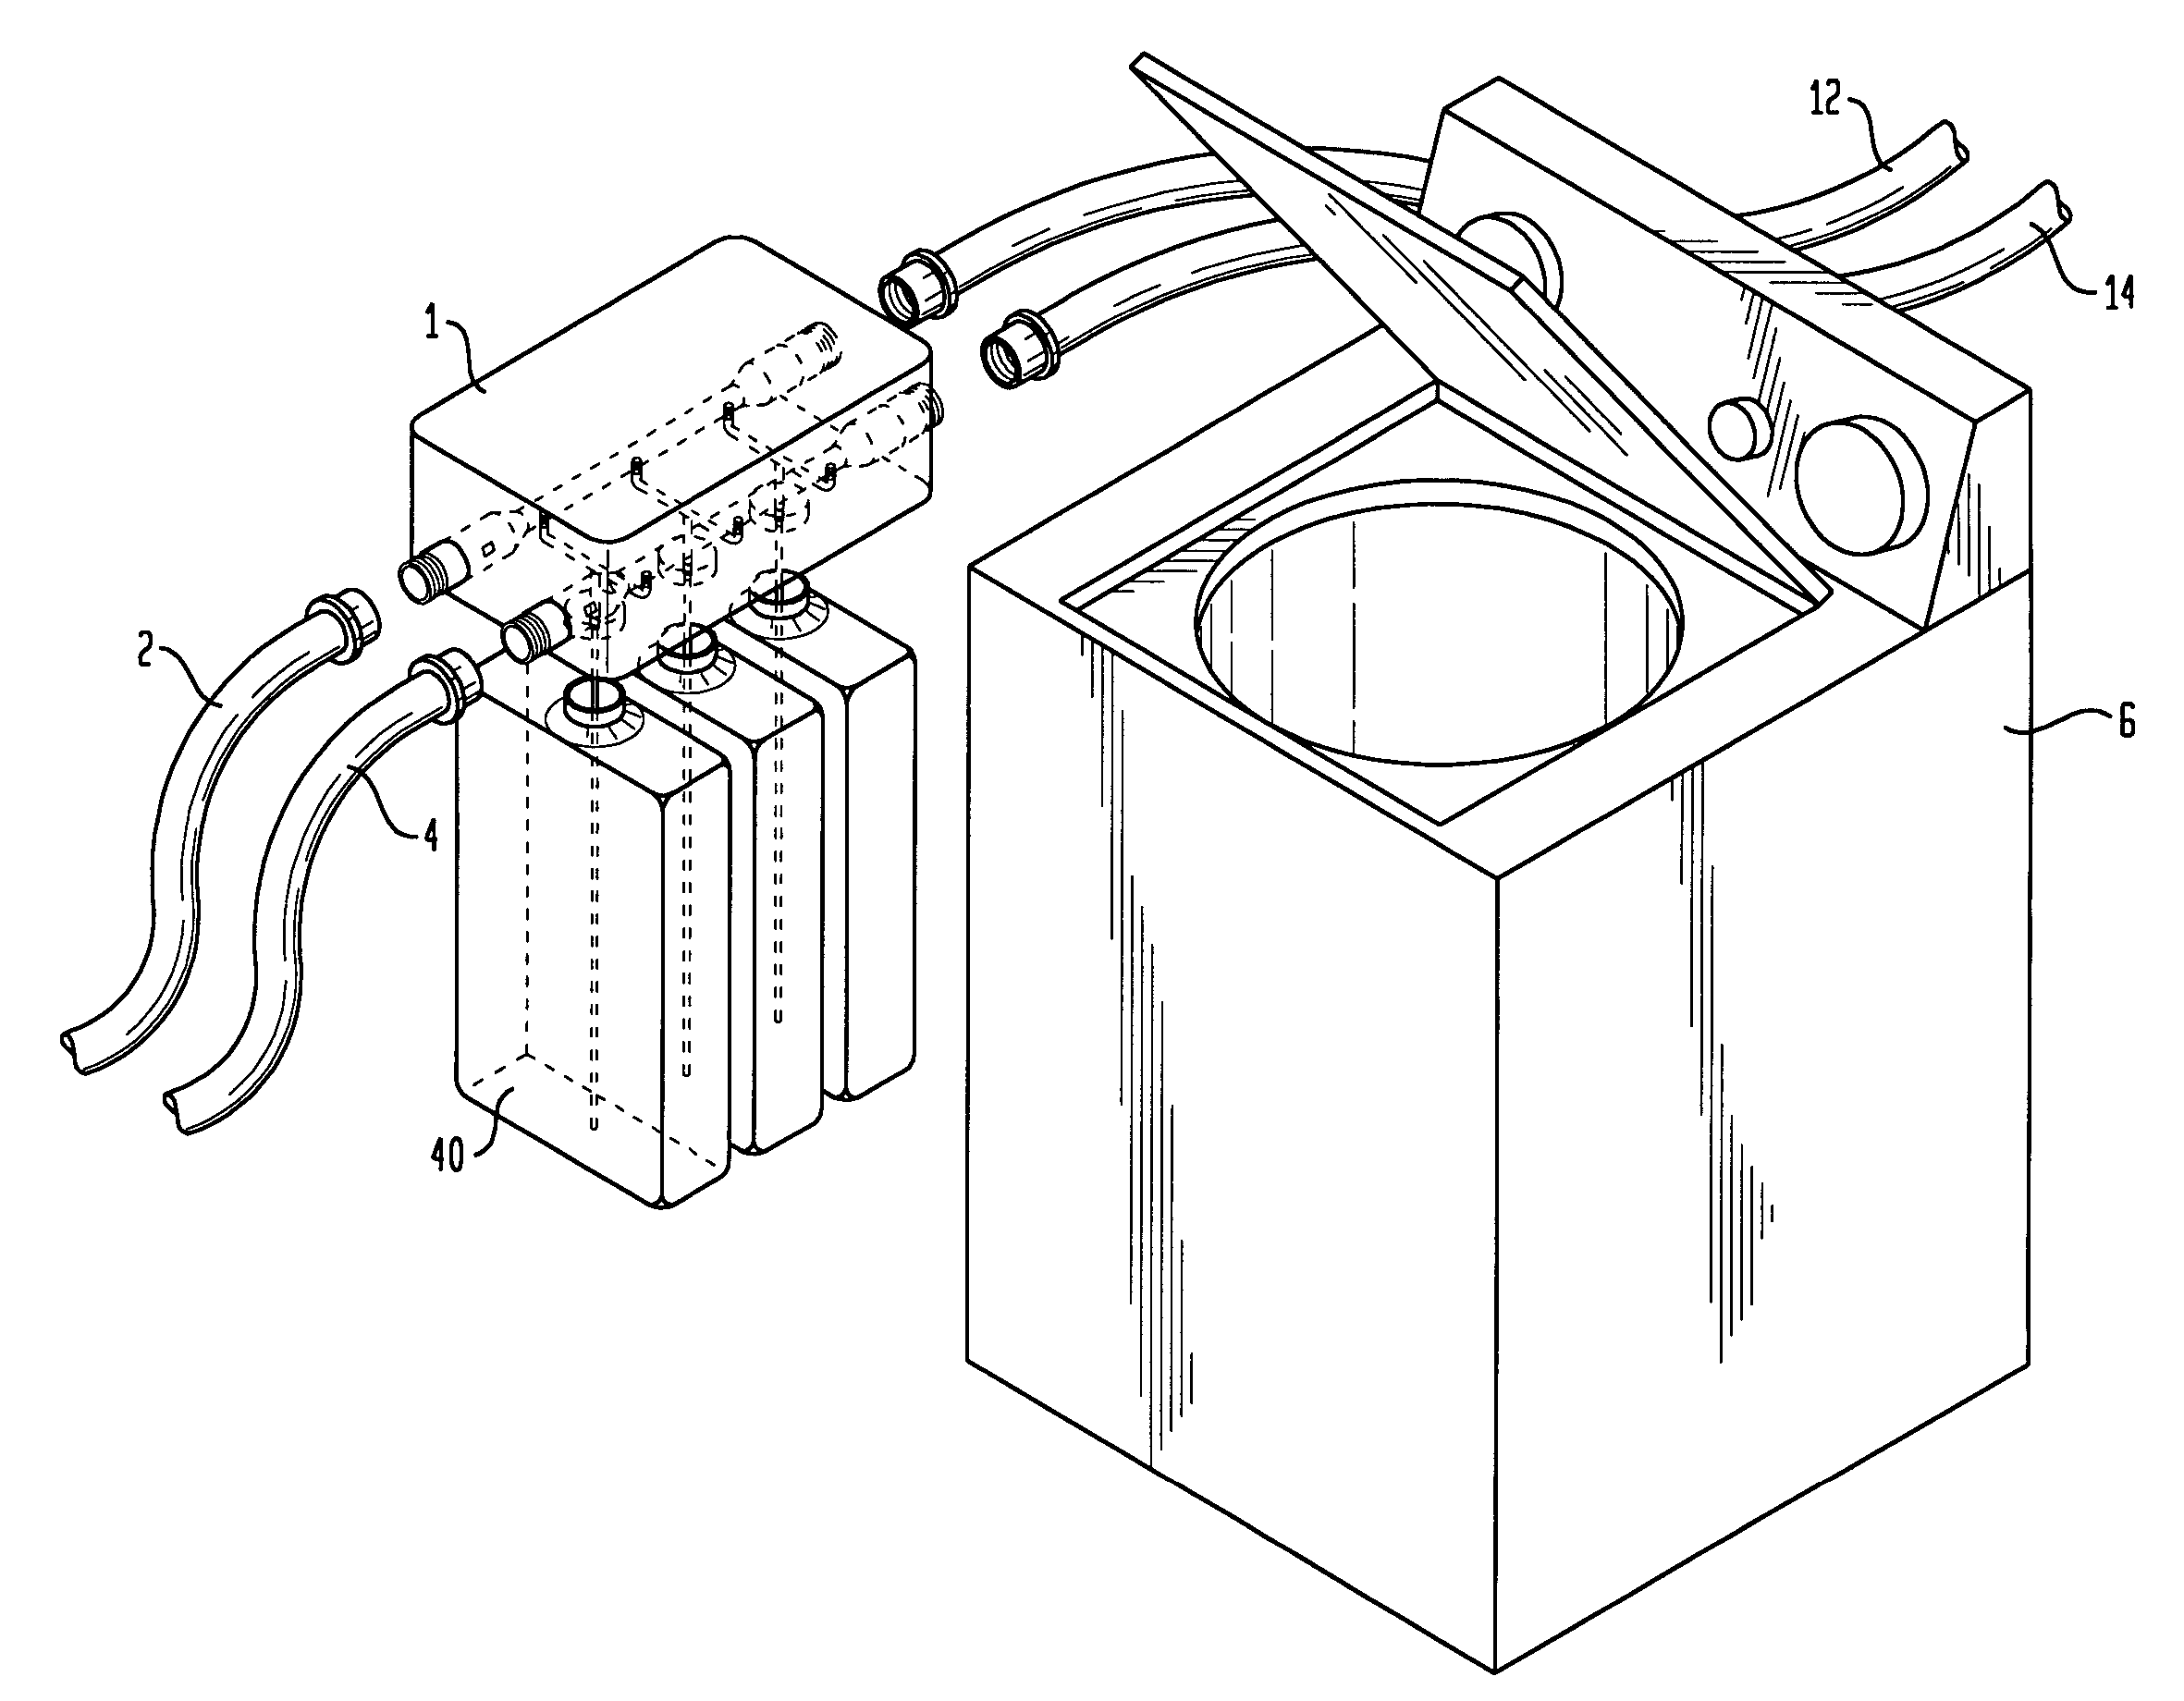 Automatic stand-alone dispensing device for laundry care composition